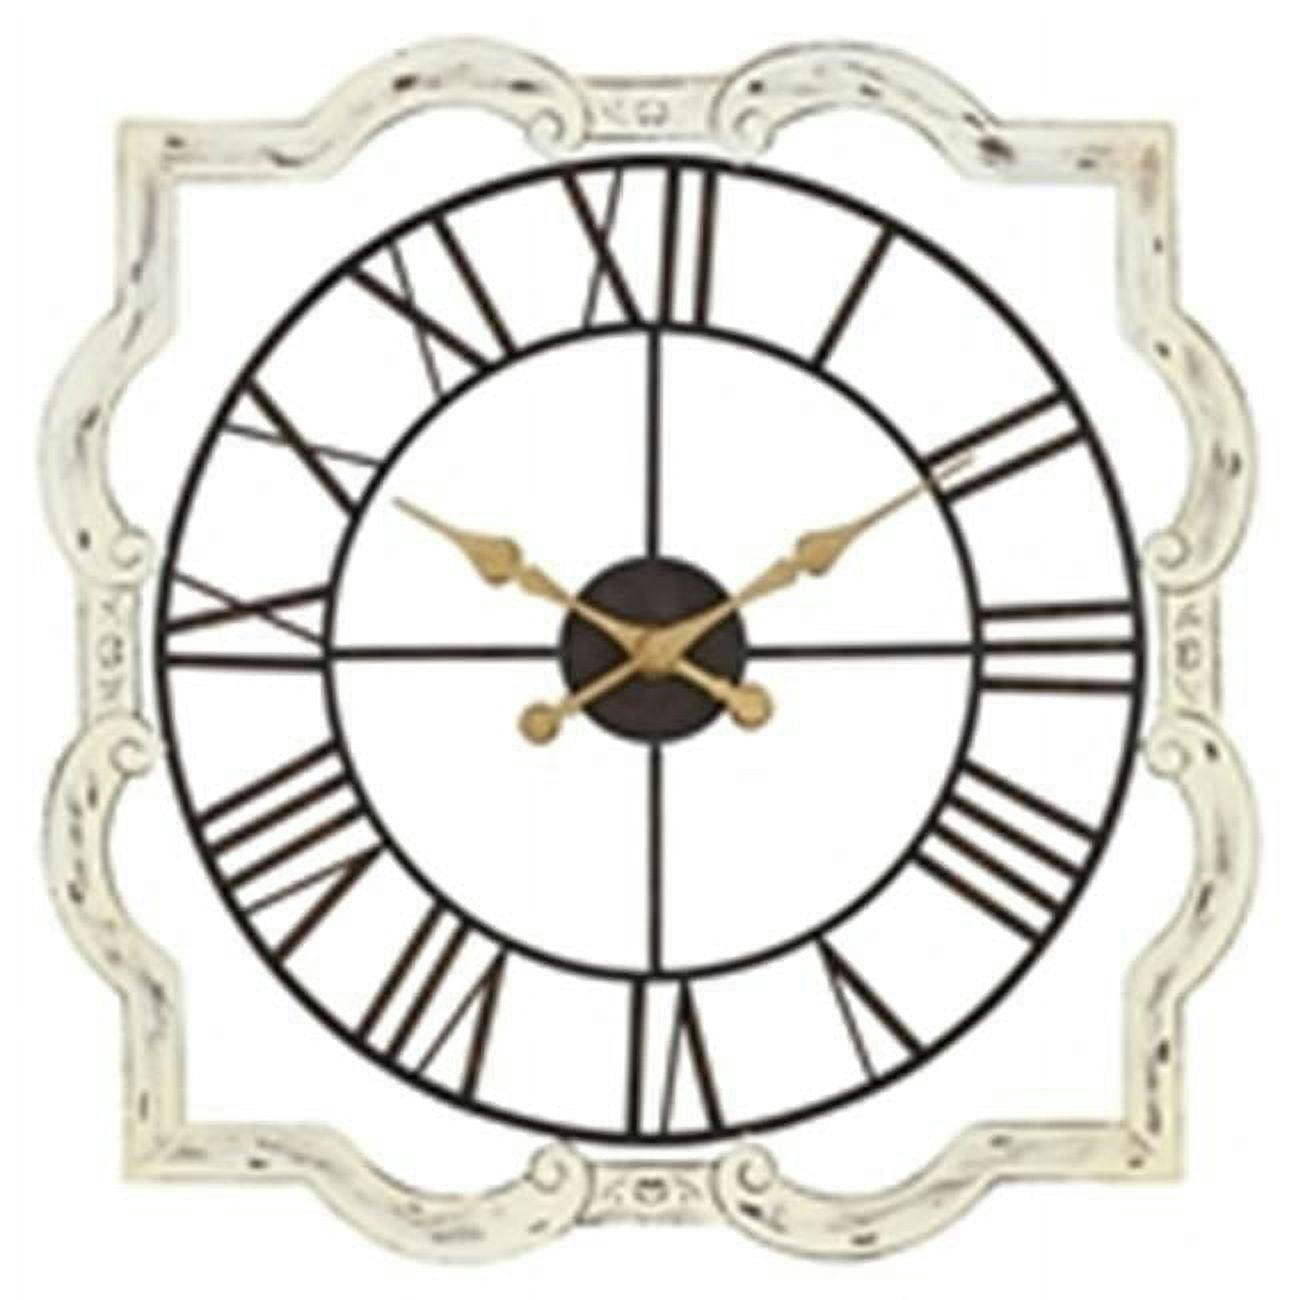 Eloise Oversized Distressed Off-White Iron Wall Clock